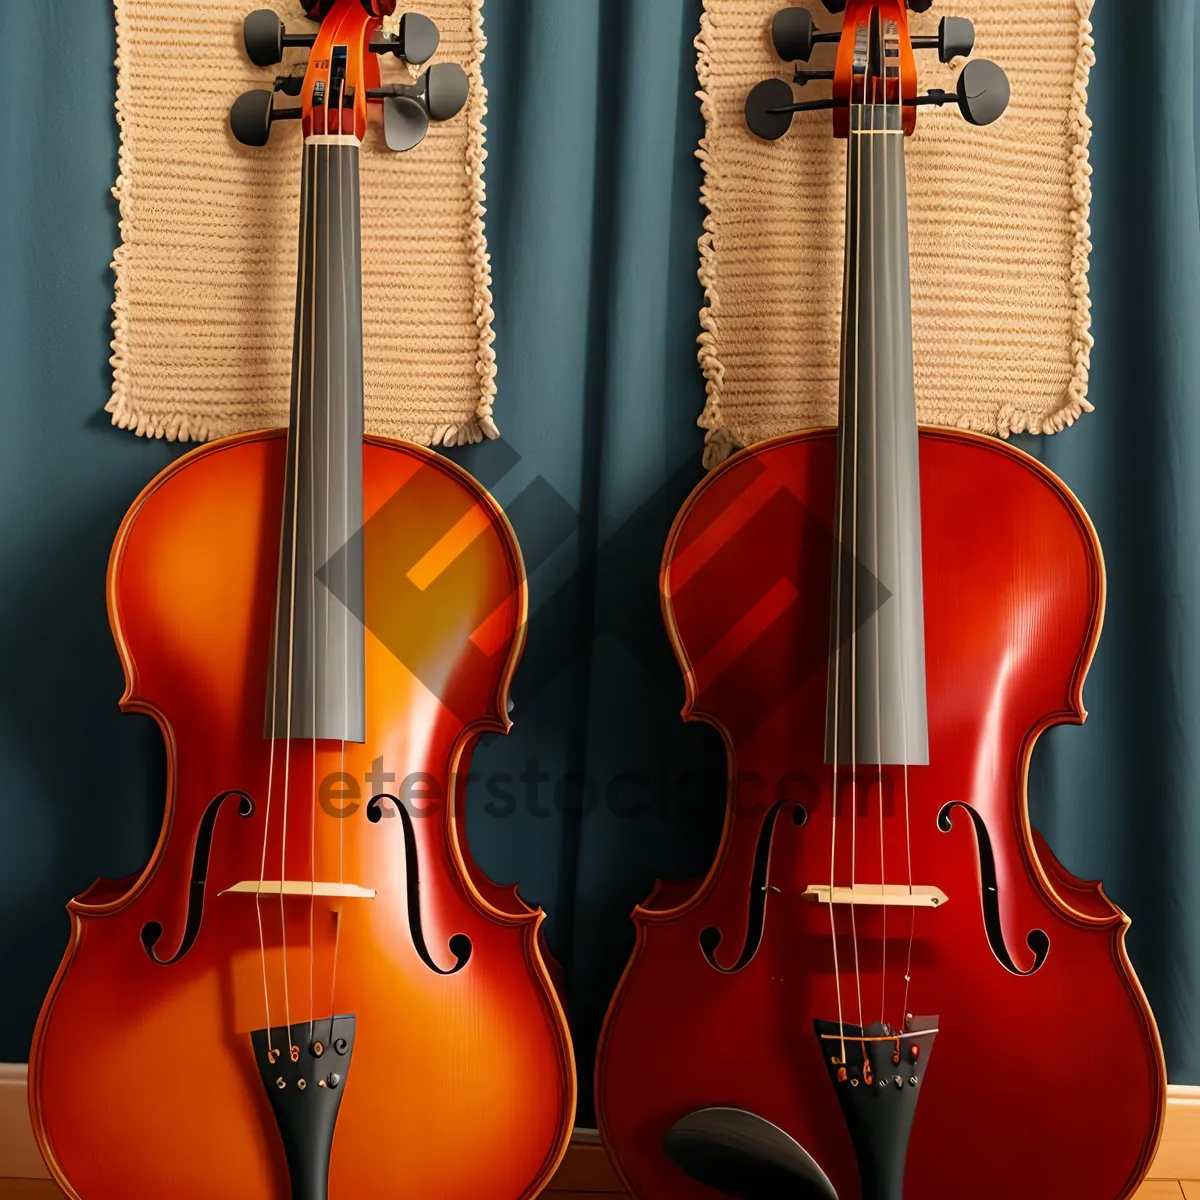 Picture of Musical Stringed Instruments in Harmony